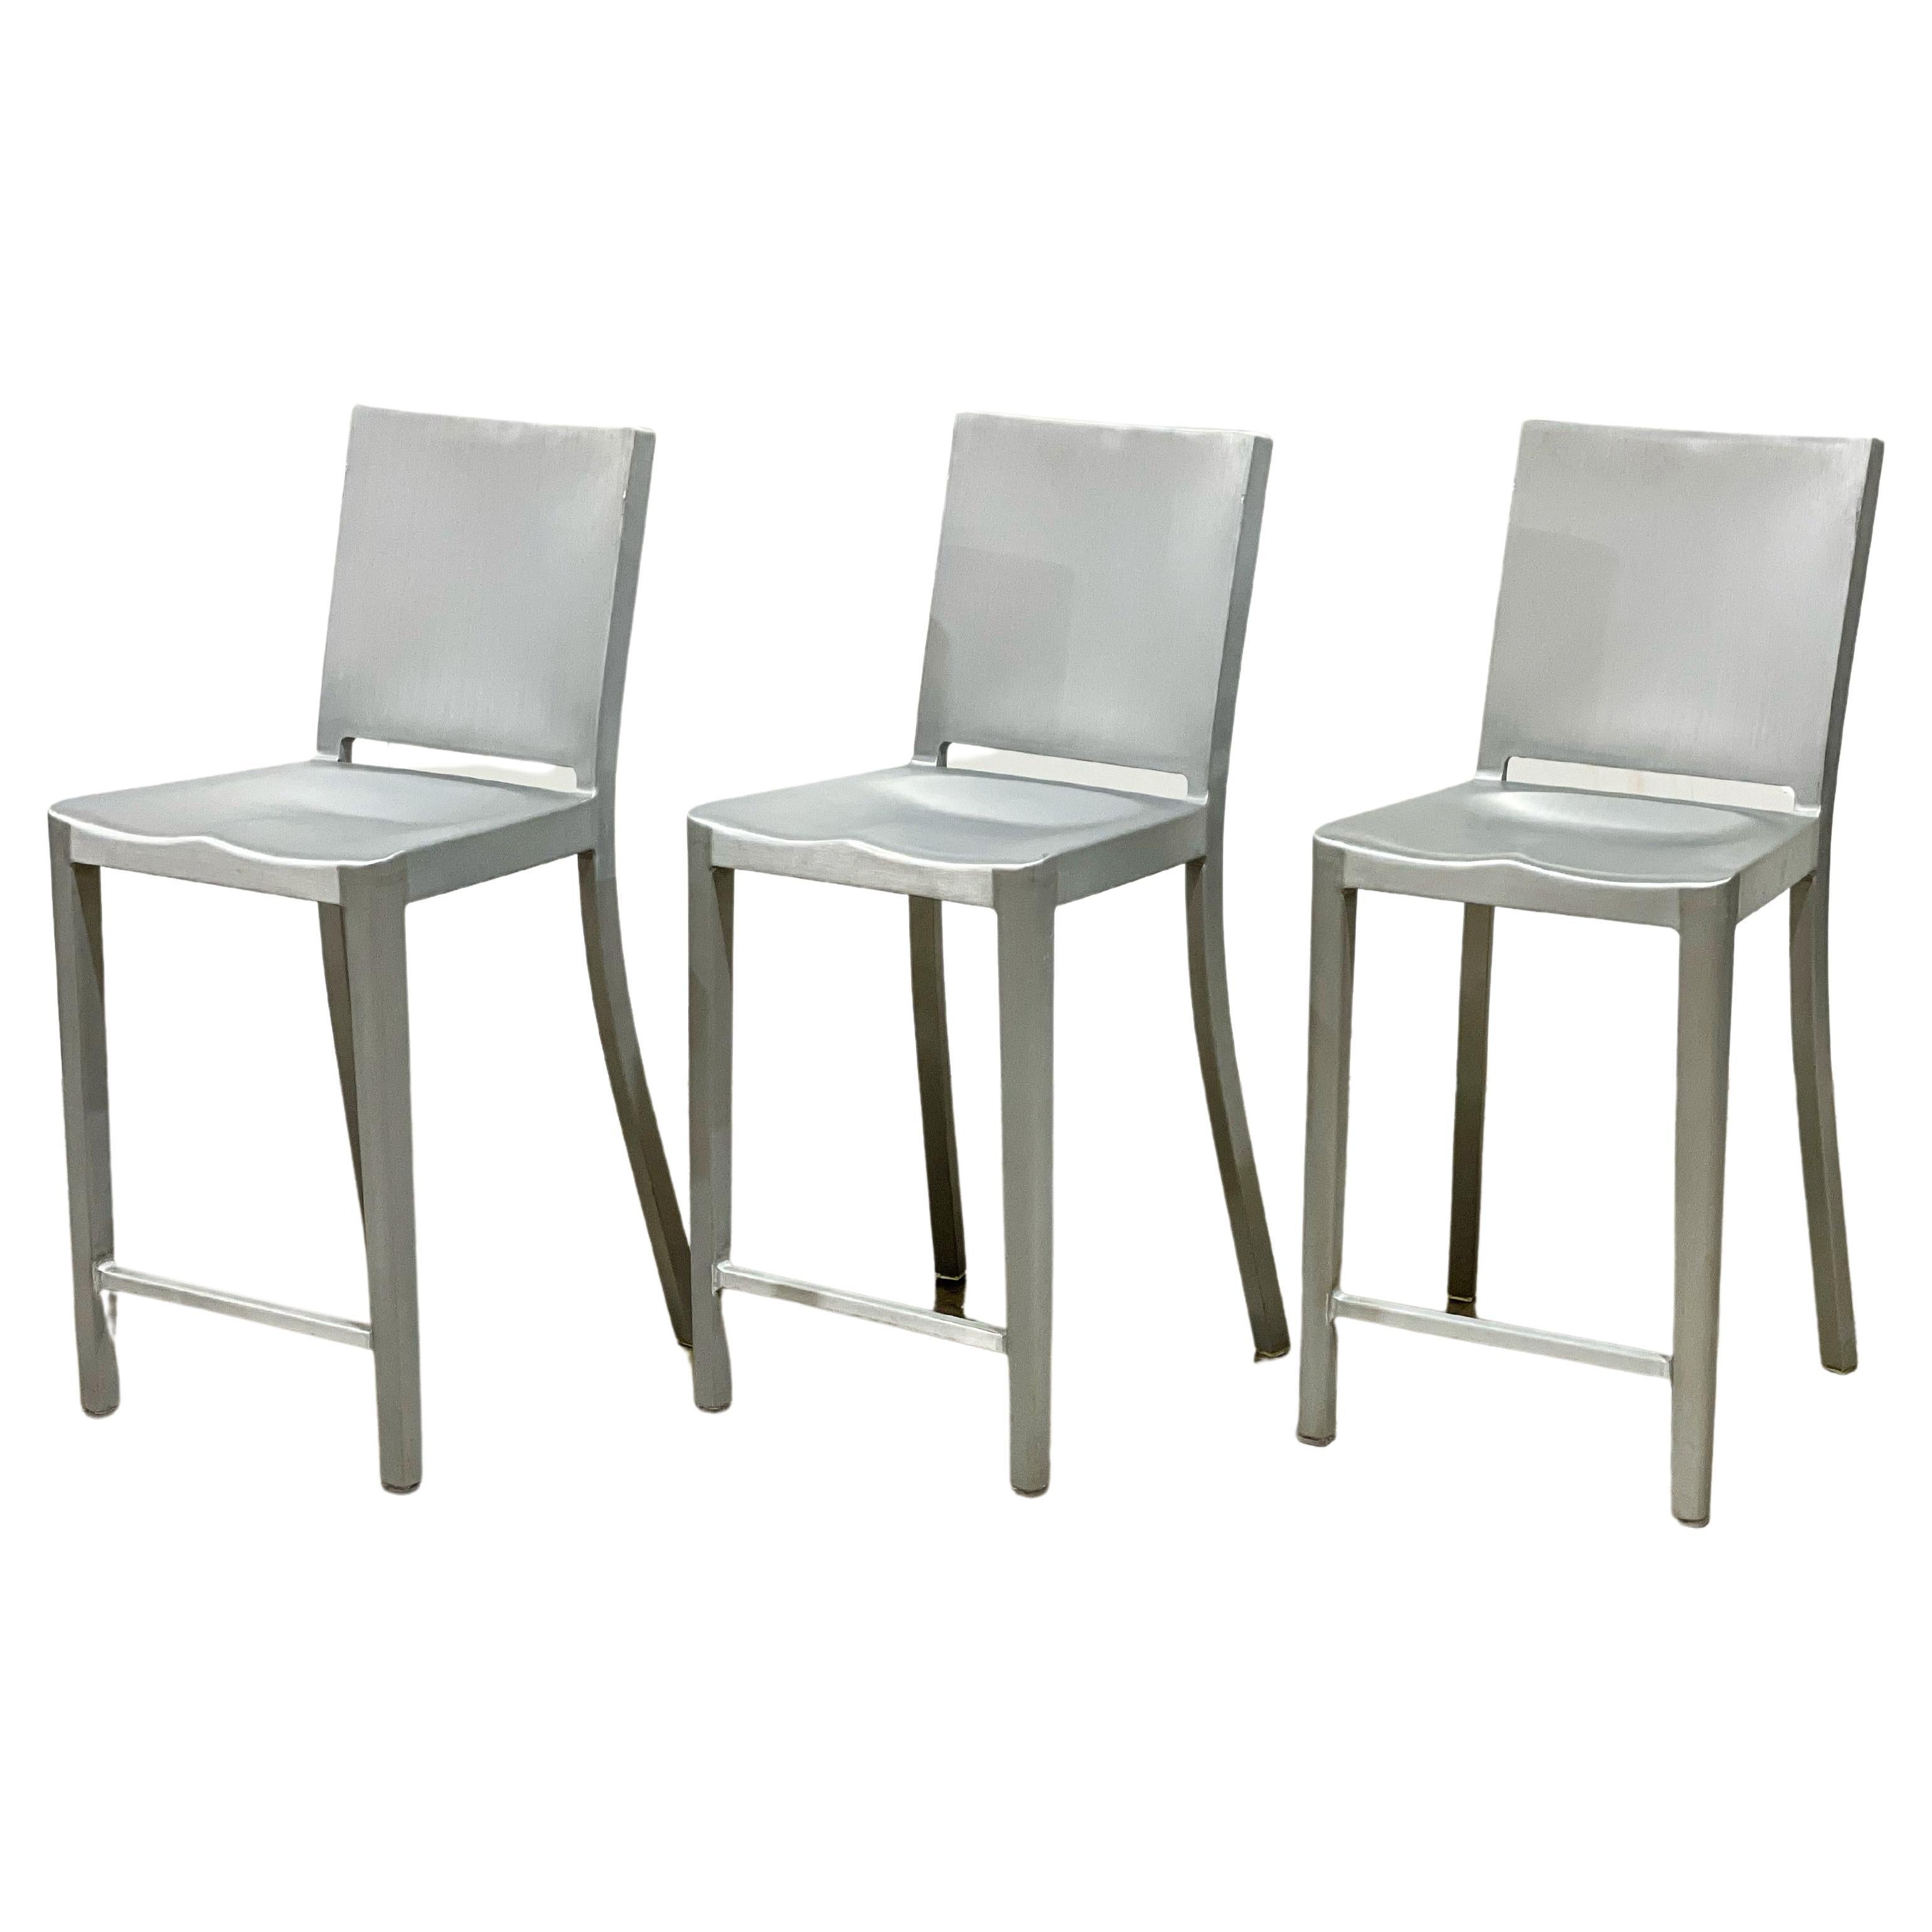 Philippe Starck + Emeco Hudson Barstools in Brushed Aluminum, Counter Height 5